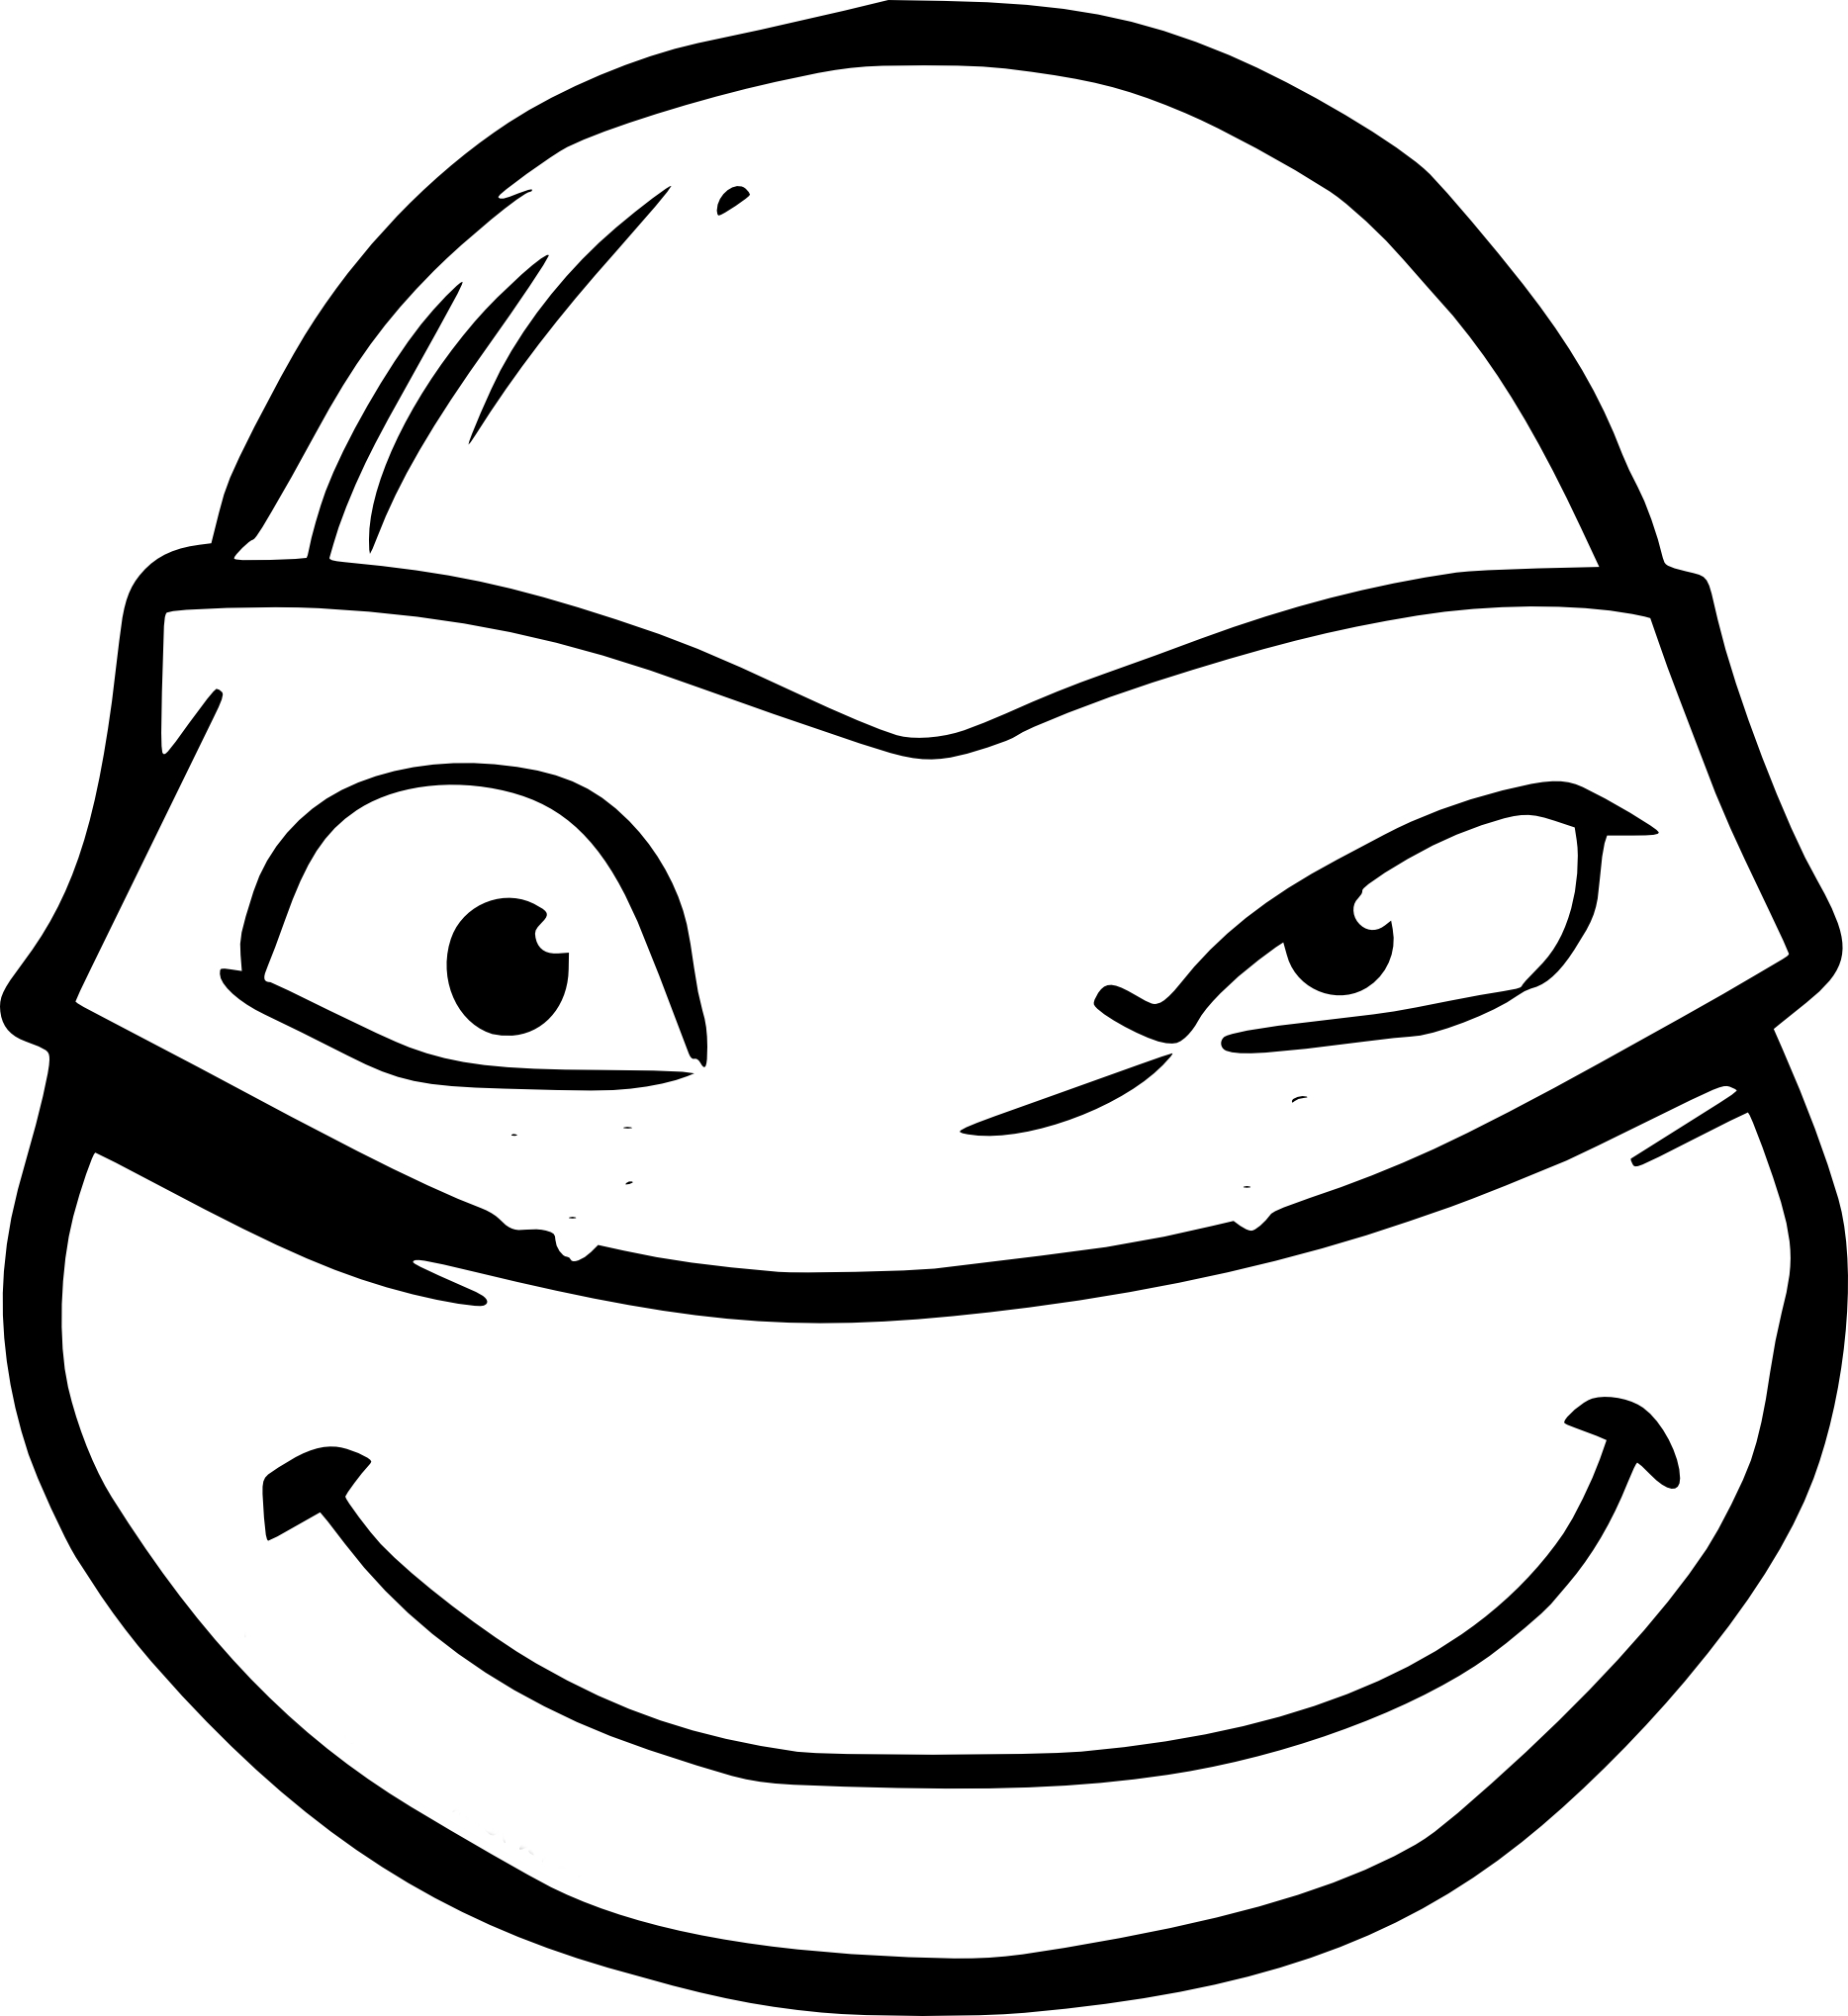 Ninja Turtle Face coloring page